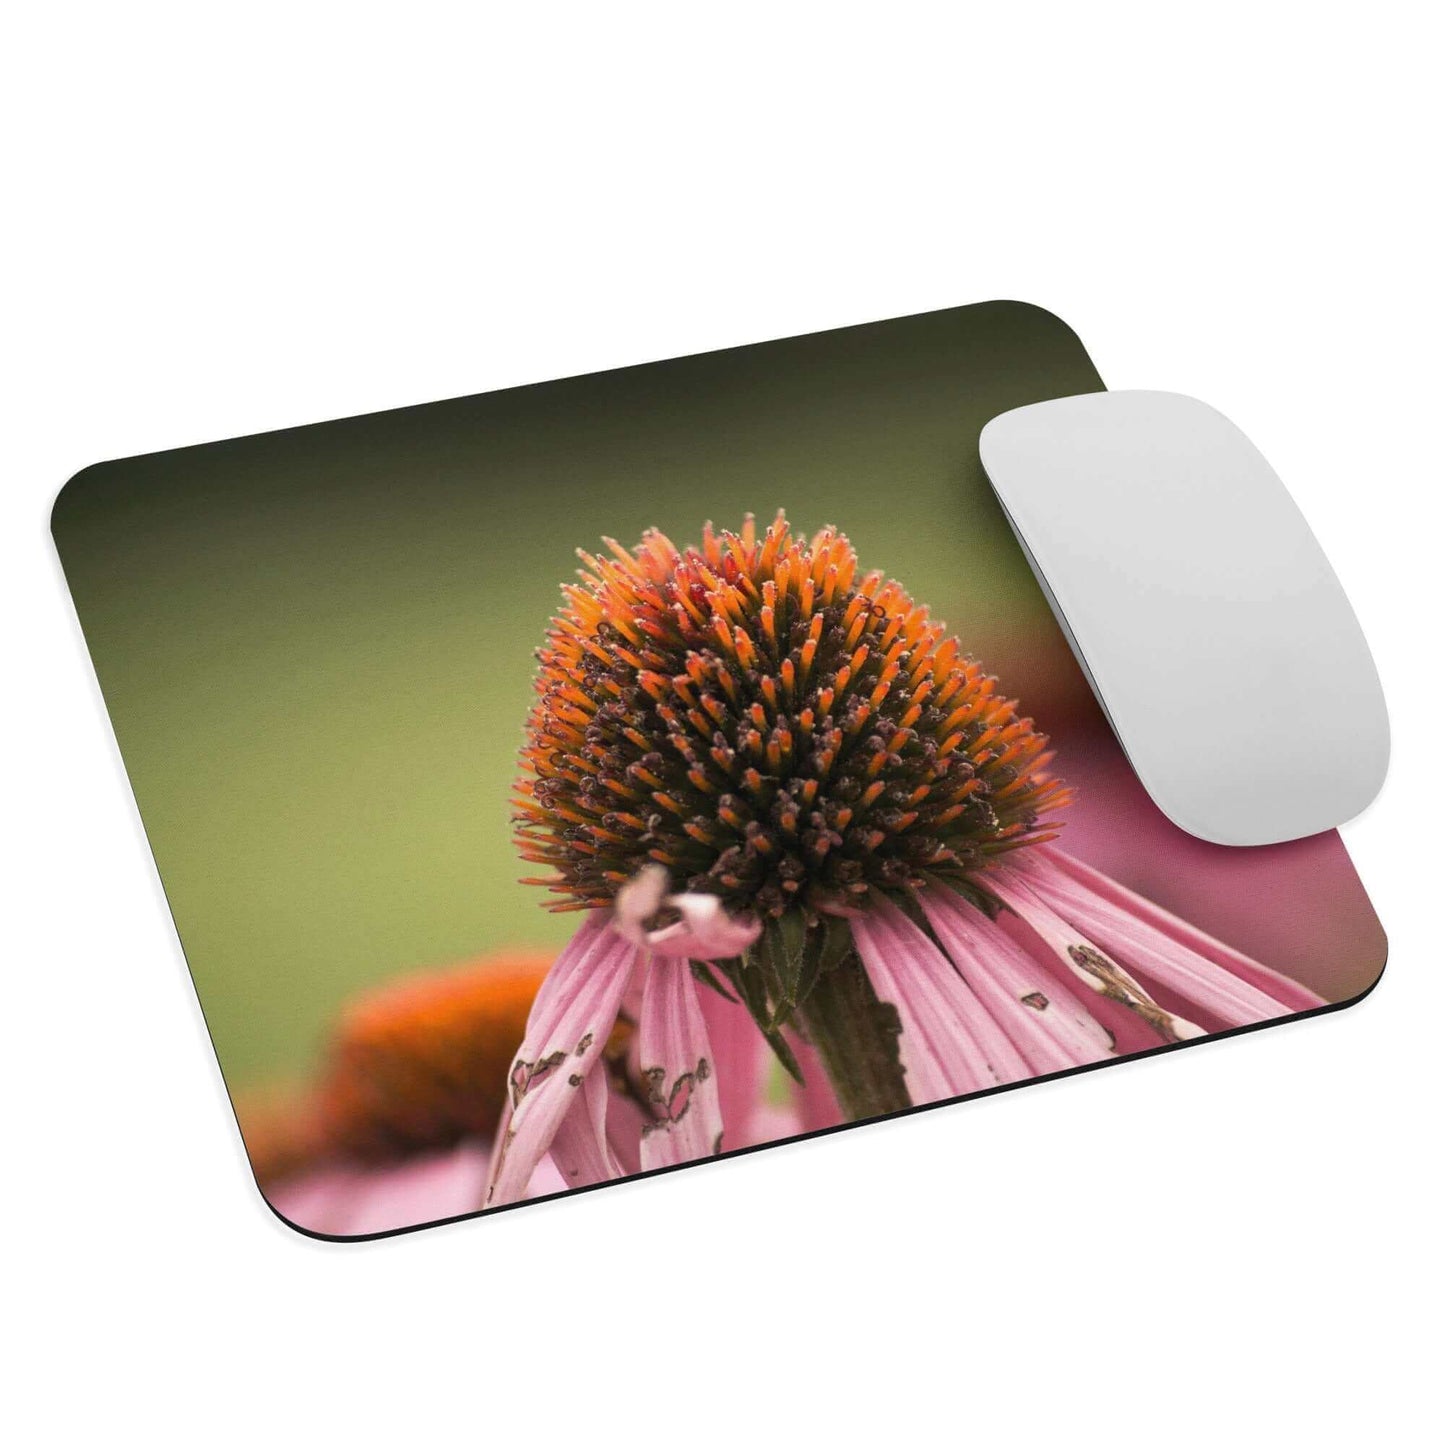 Cone flower up close - Mouse pad close up cone cone flower flower mouse pad nature zoom